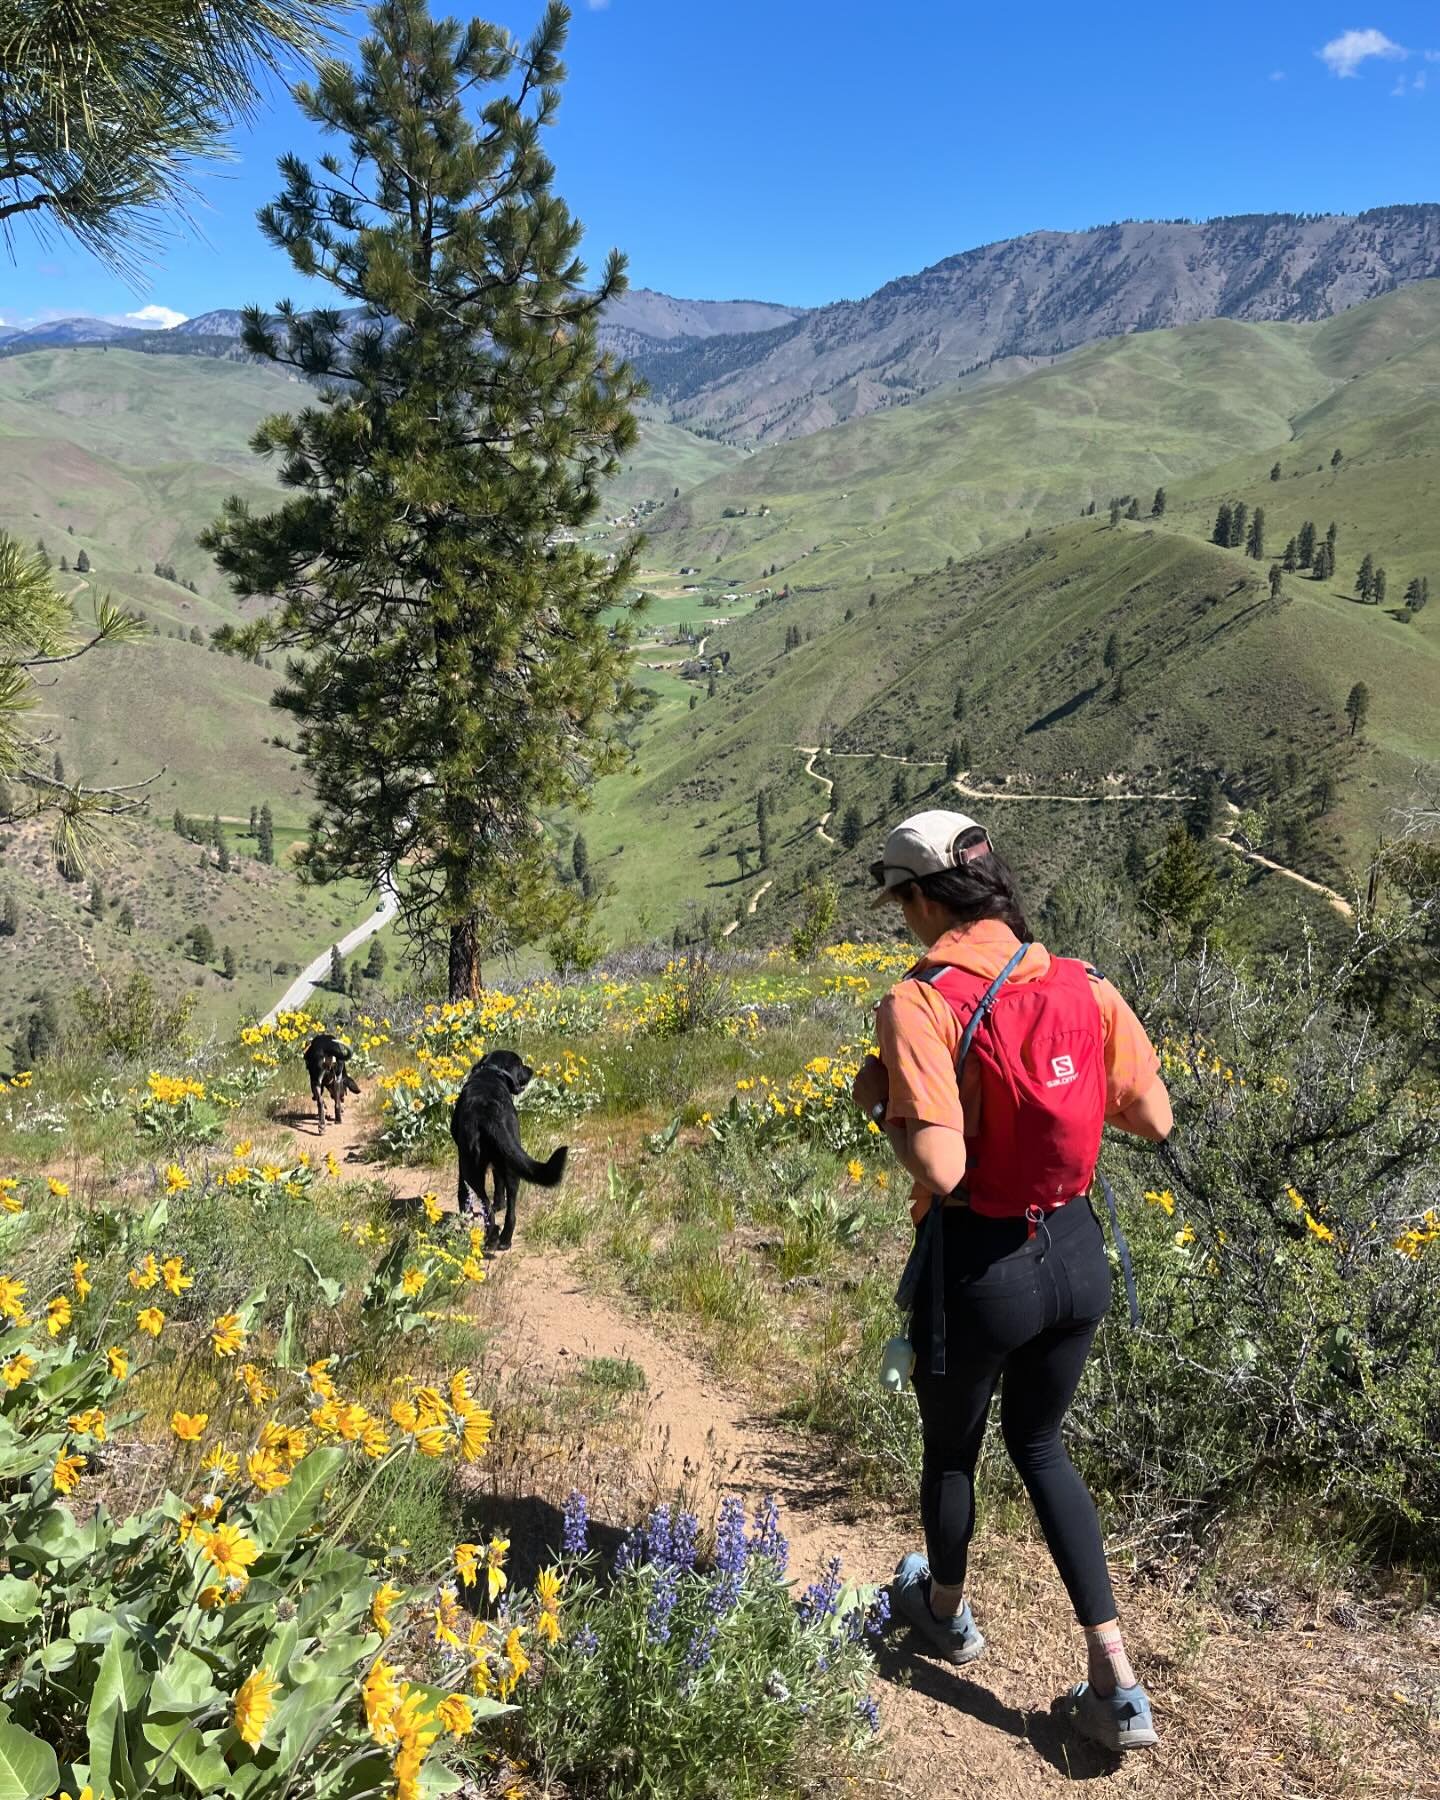 Here comes the weekend! What adventures do you have planned? Wild flower viewing? Whitewater paddling? Mountain biking? Whatever you get up to, we hope you can take advantage of all that spring has to offer in North Central Washington!

#colchuckcons